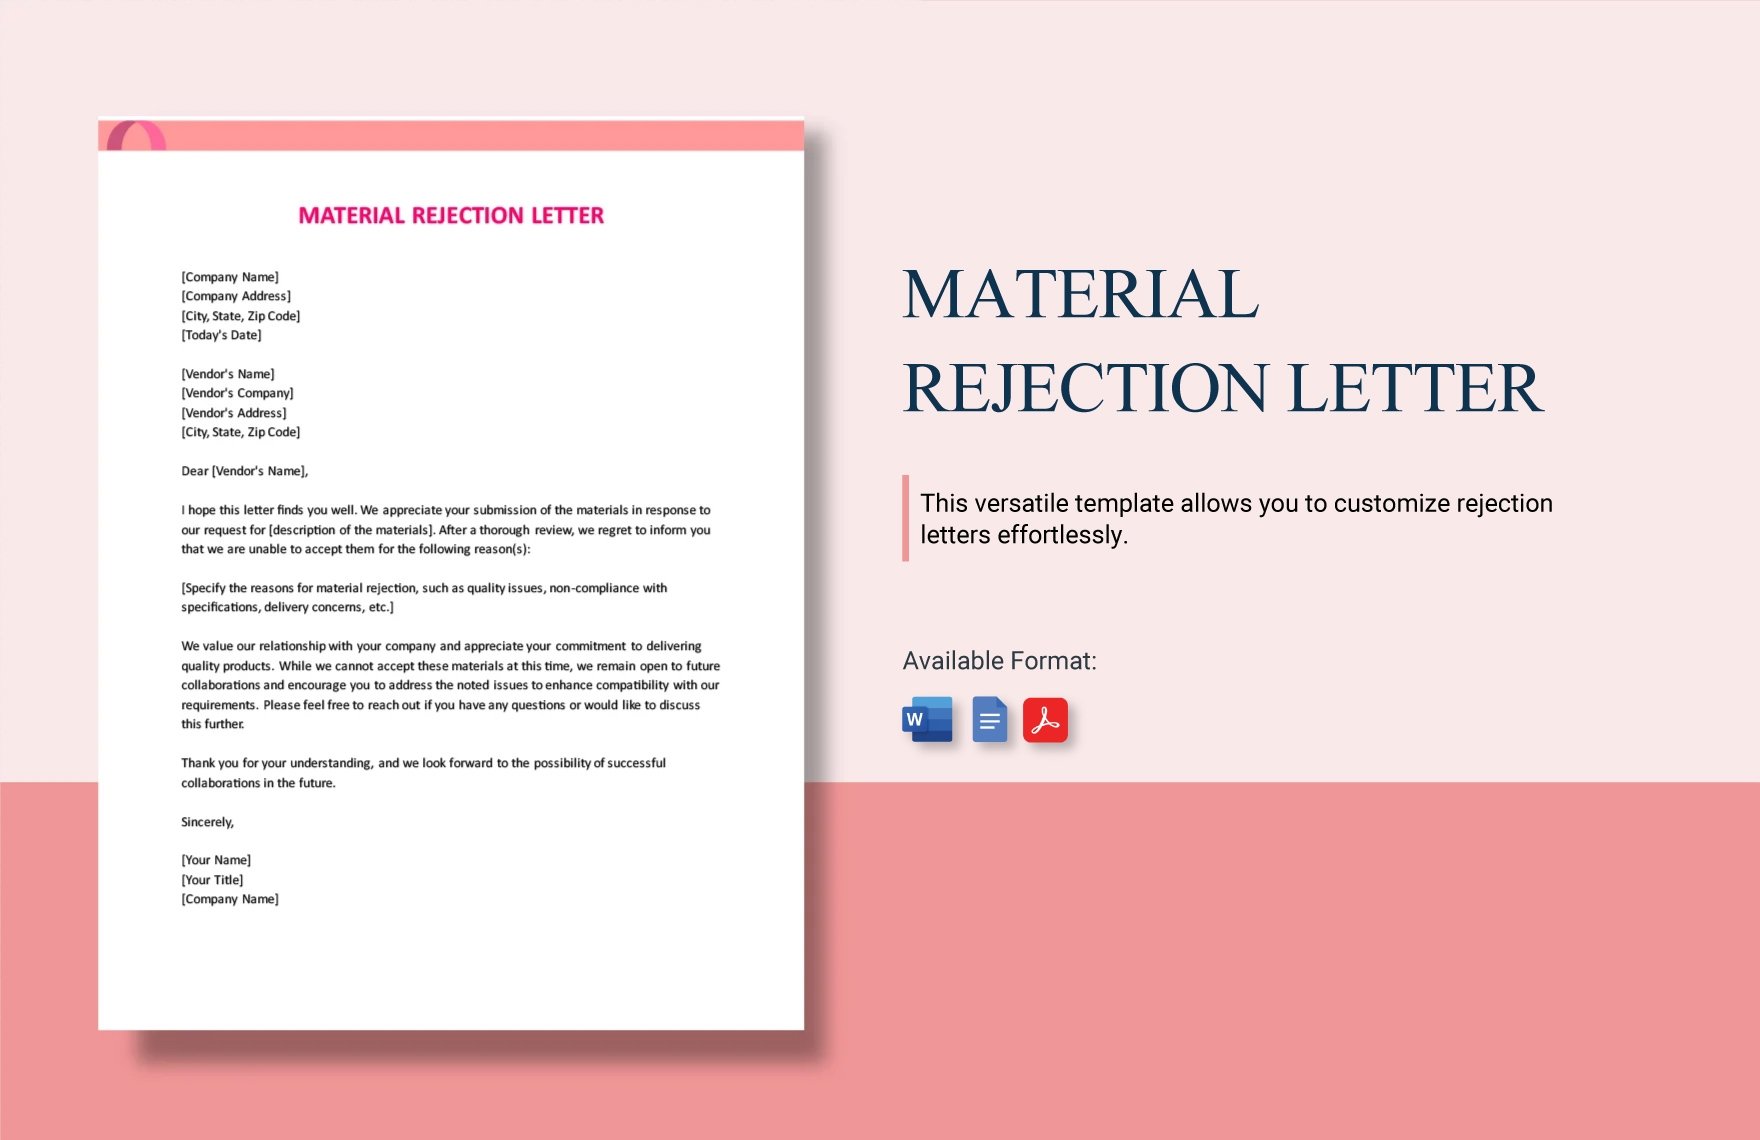 Material Rejection Letter in Word, Google Docs, PDF